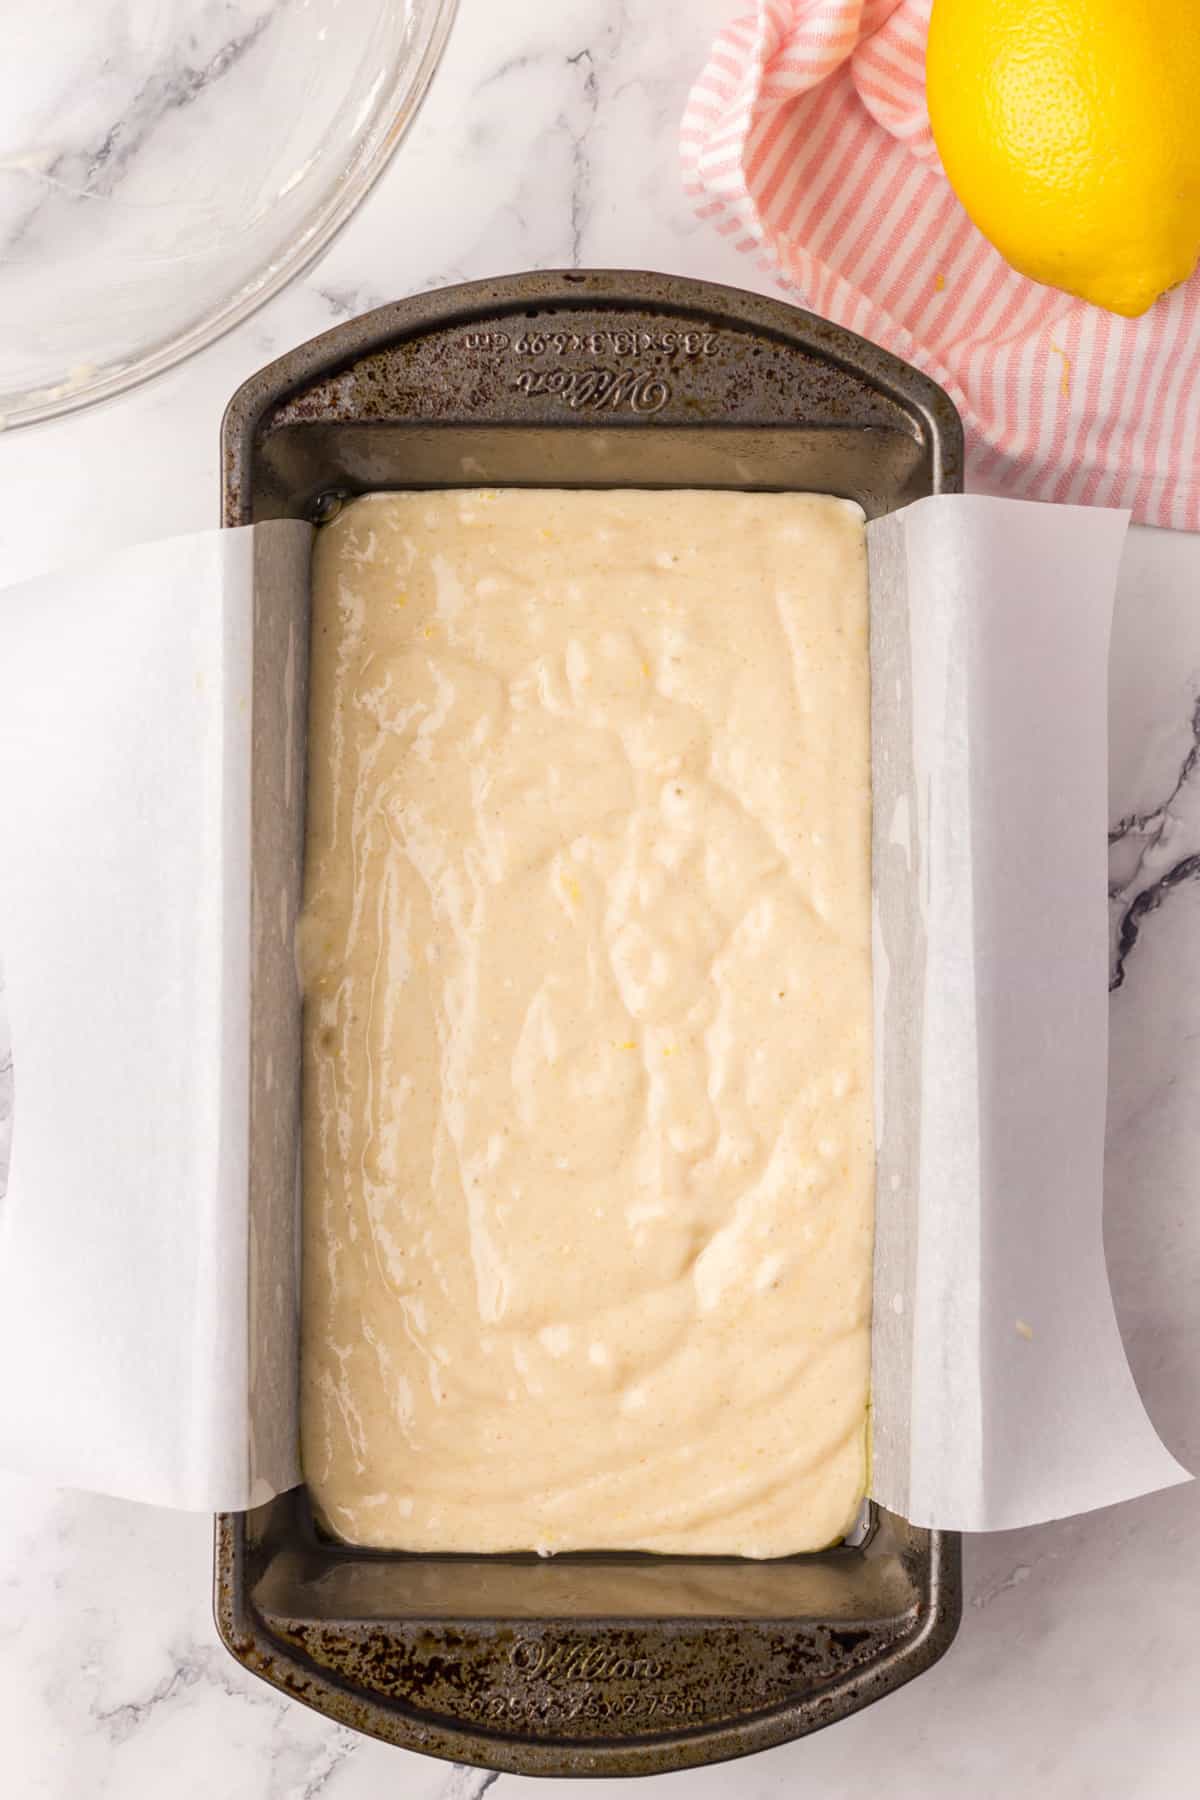 A lined loaf pan with lemon cake batter in.